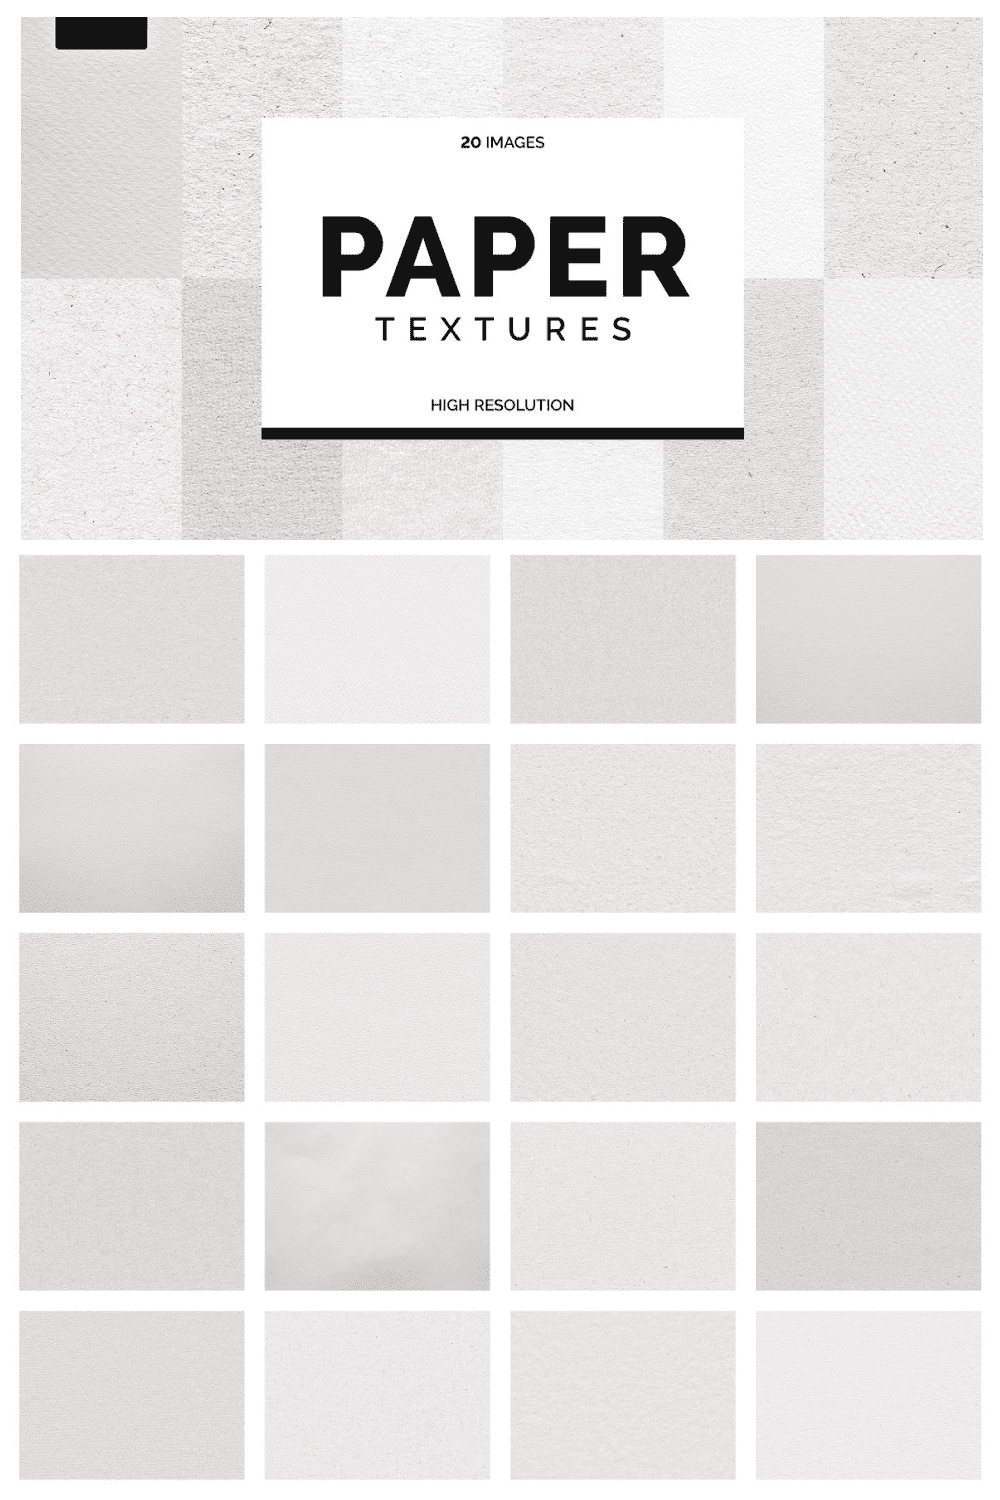 20 White Paper Textures.